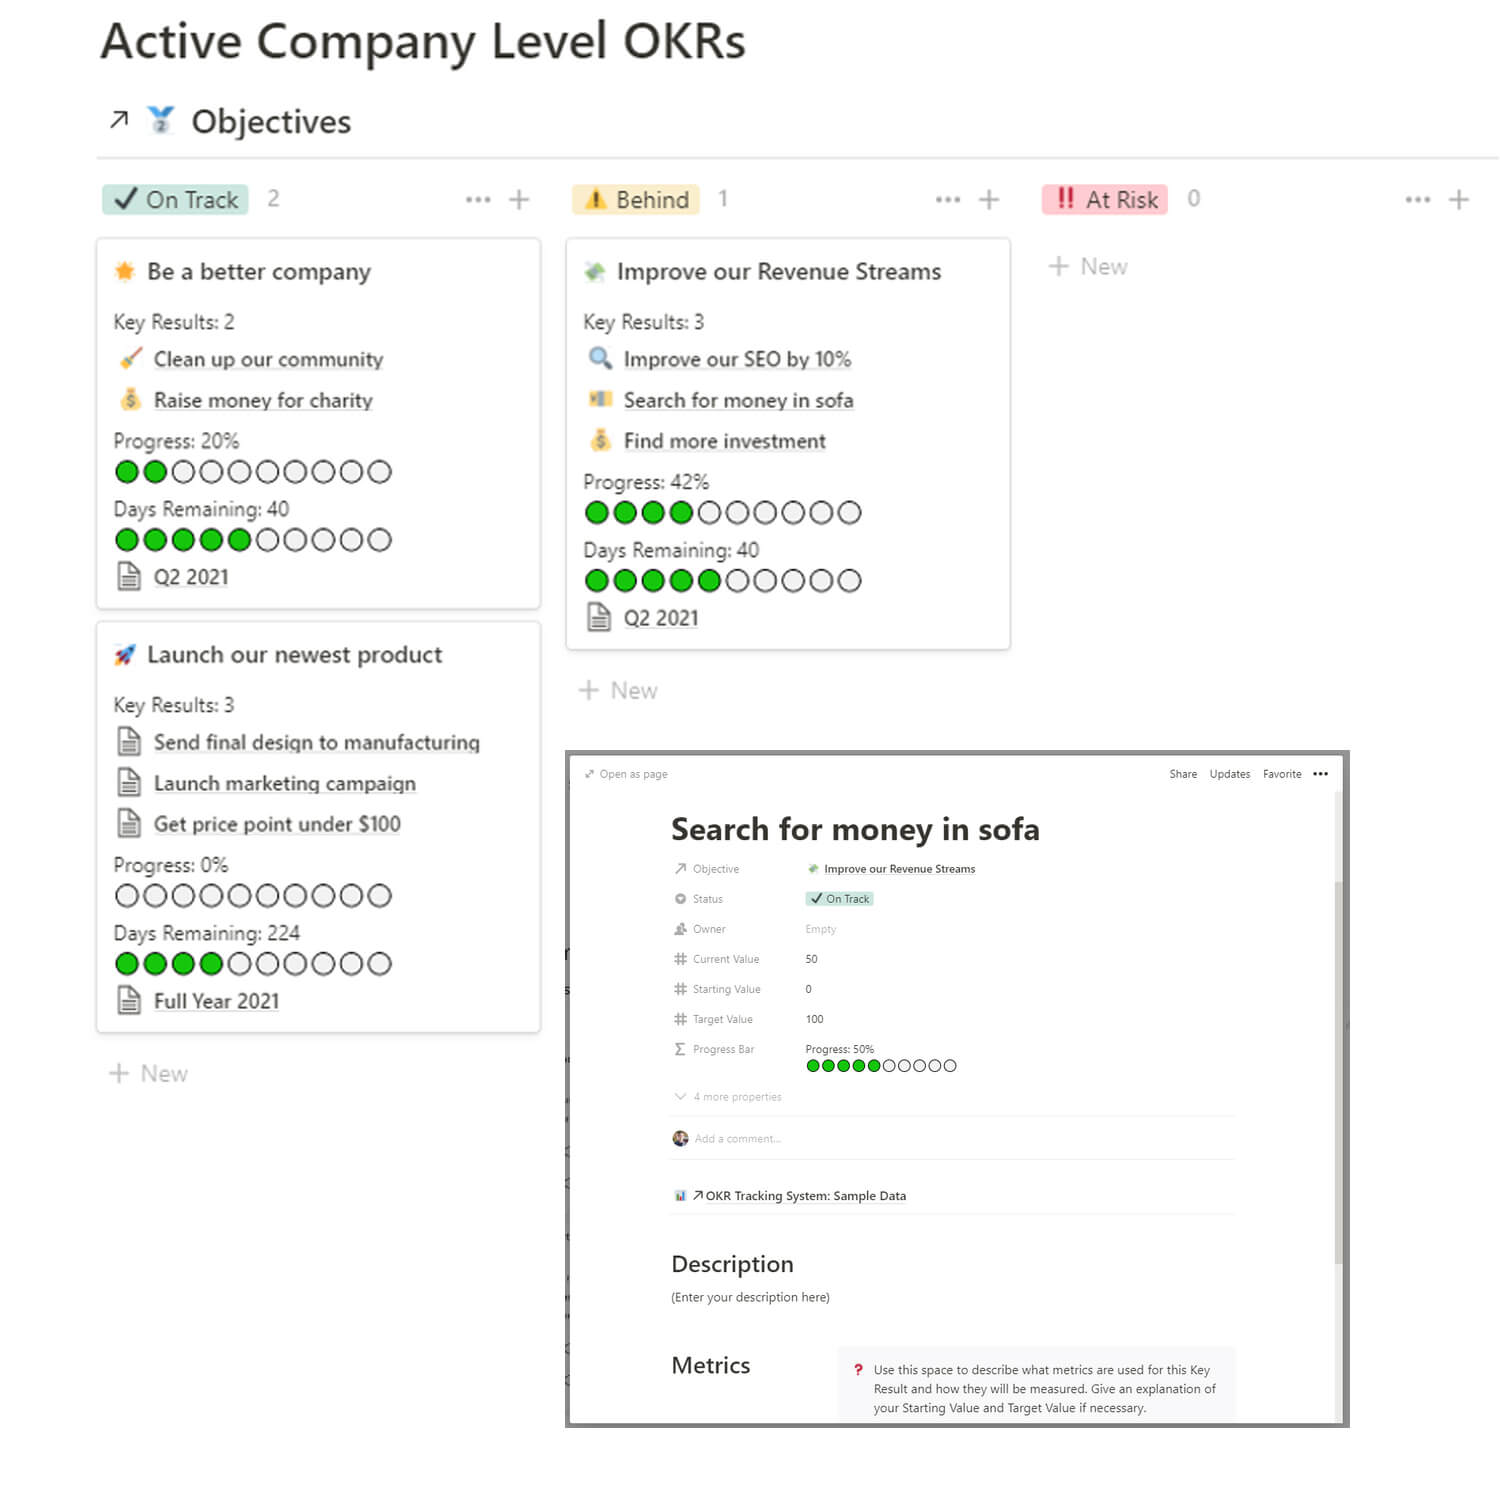 Objectives of Active Company Level OKRs.